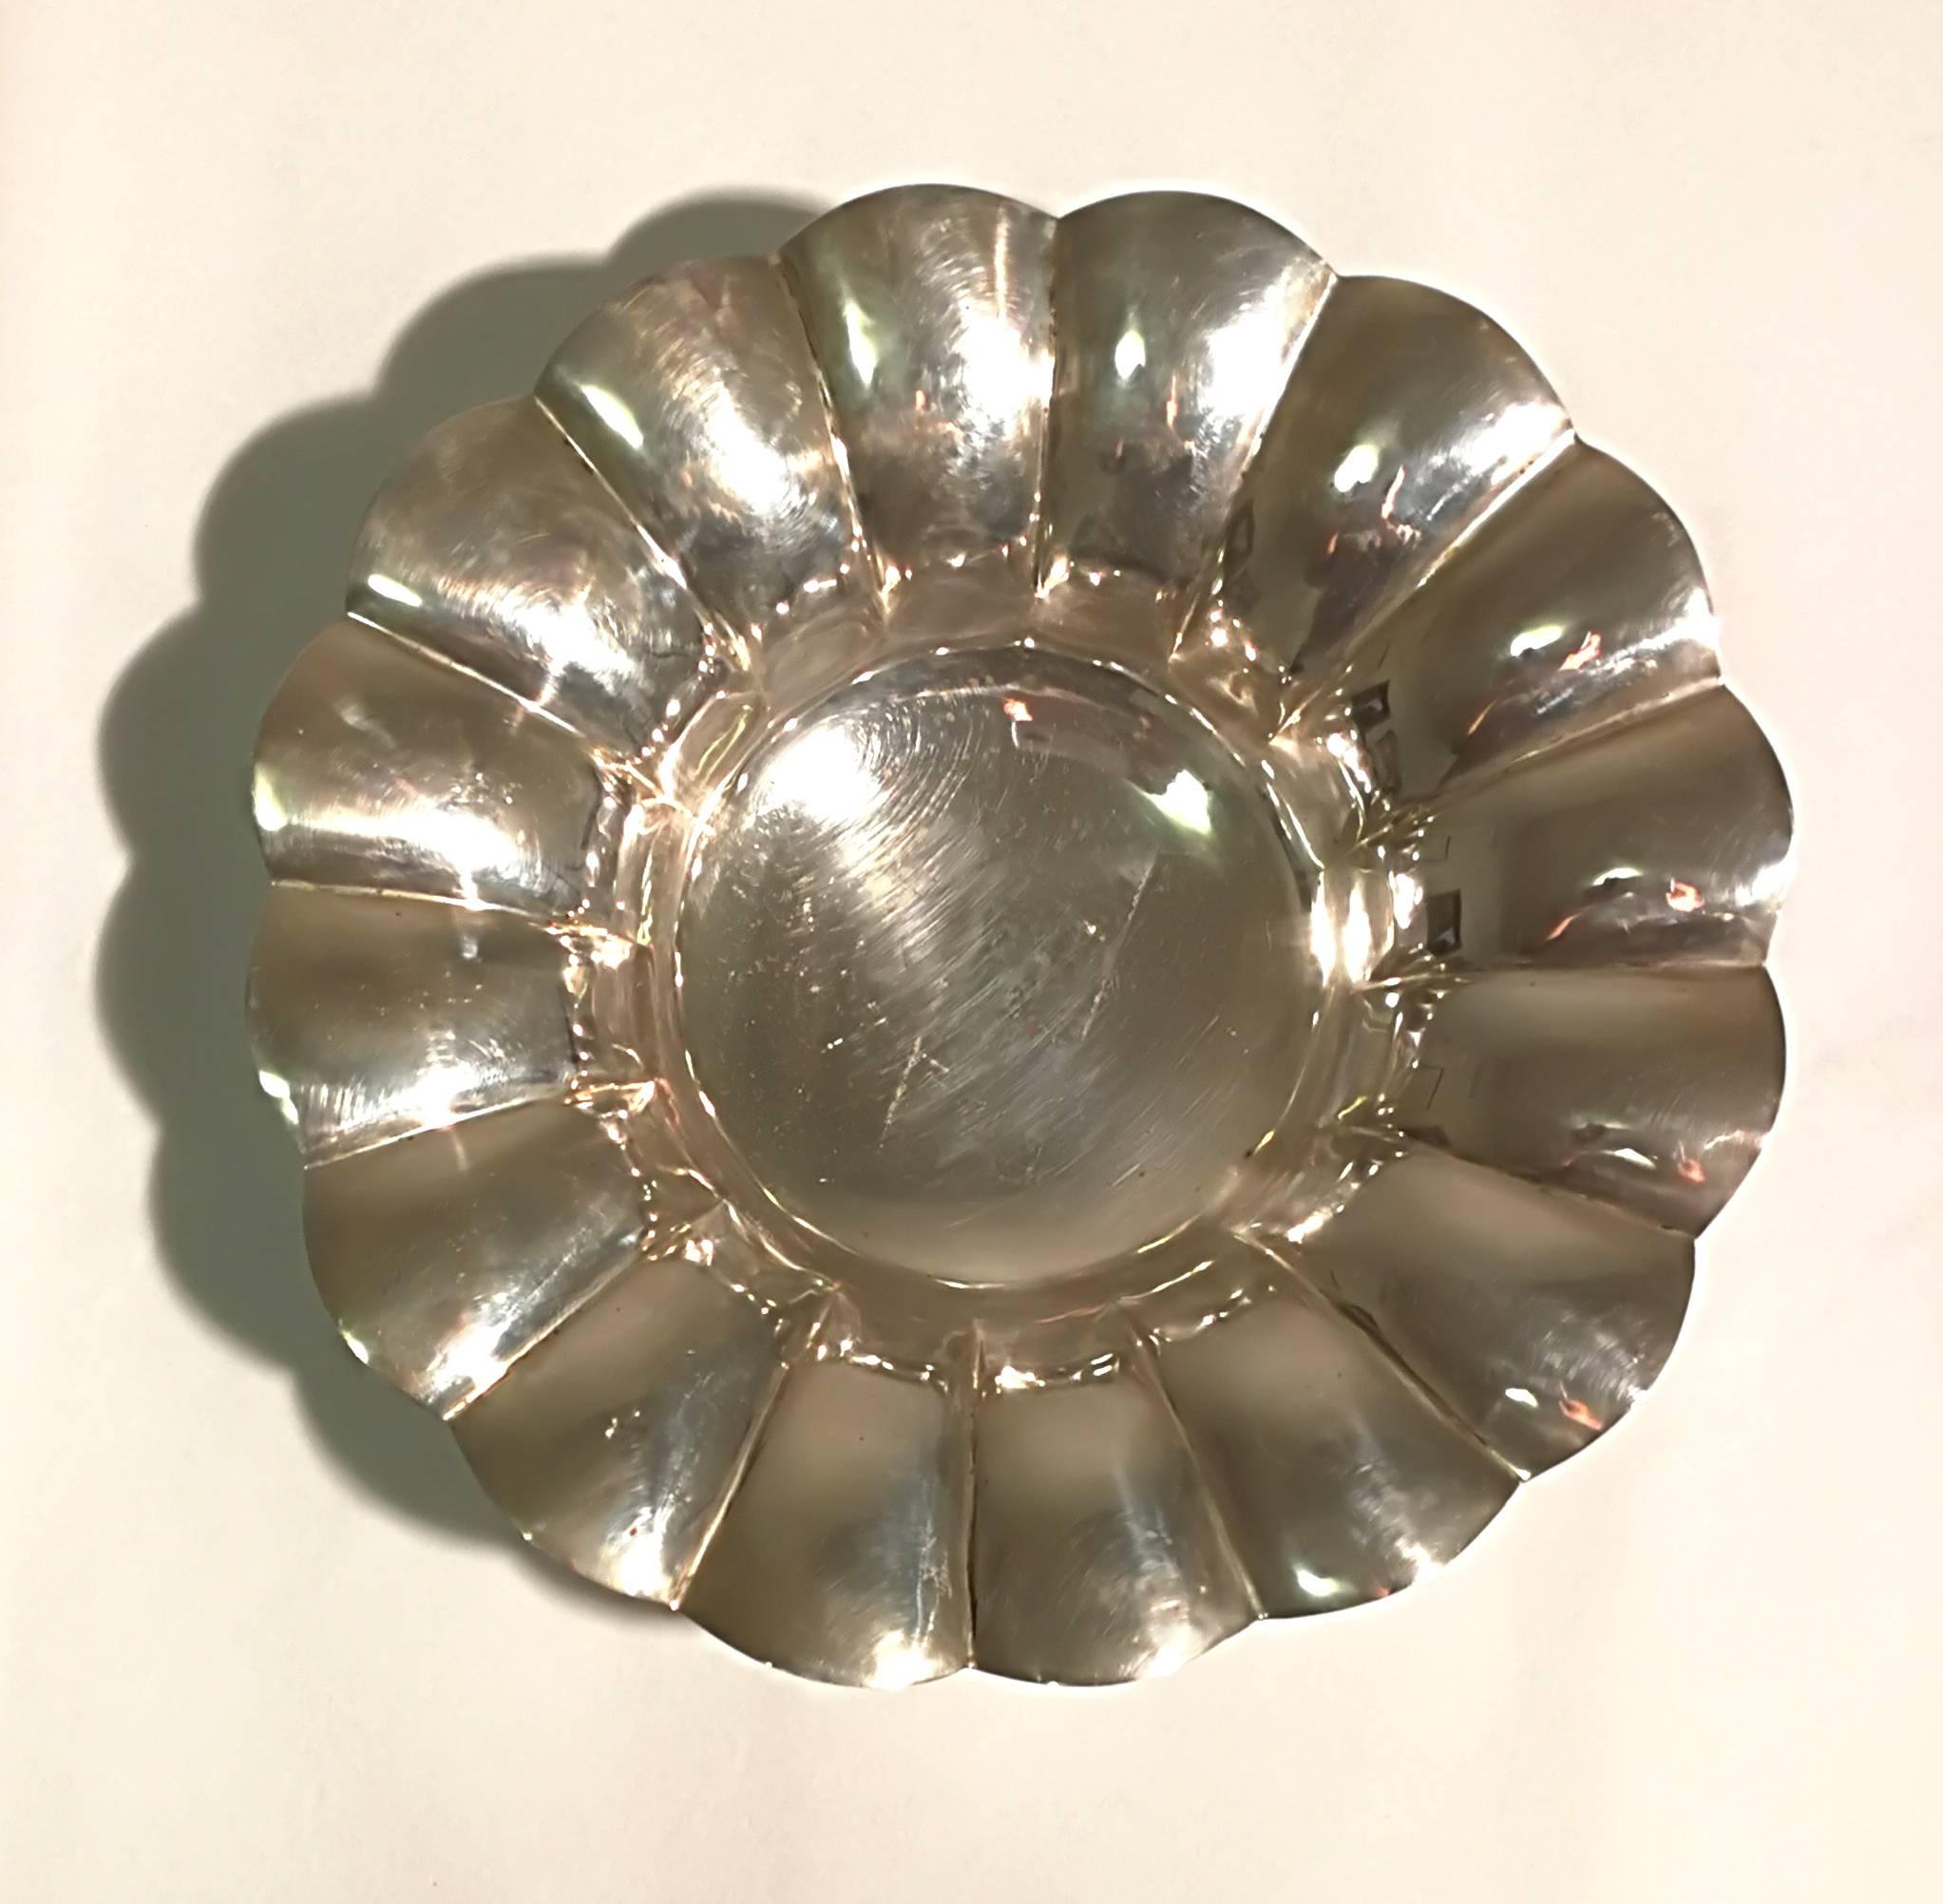 Nice round silver centrepiece embossed. Nice piece in good conditions but with tape stains.